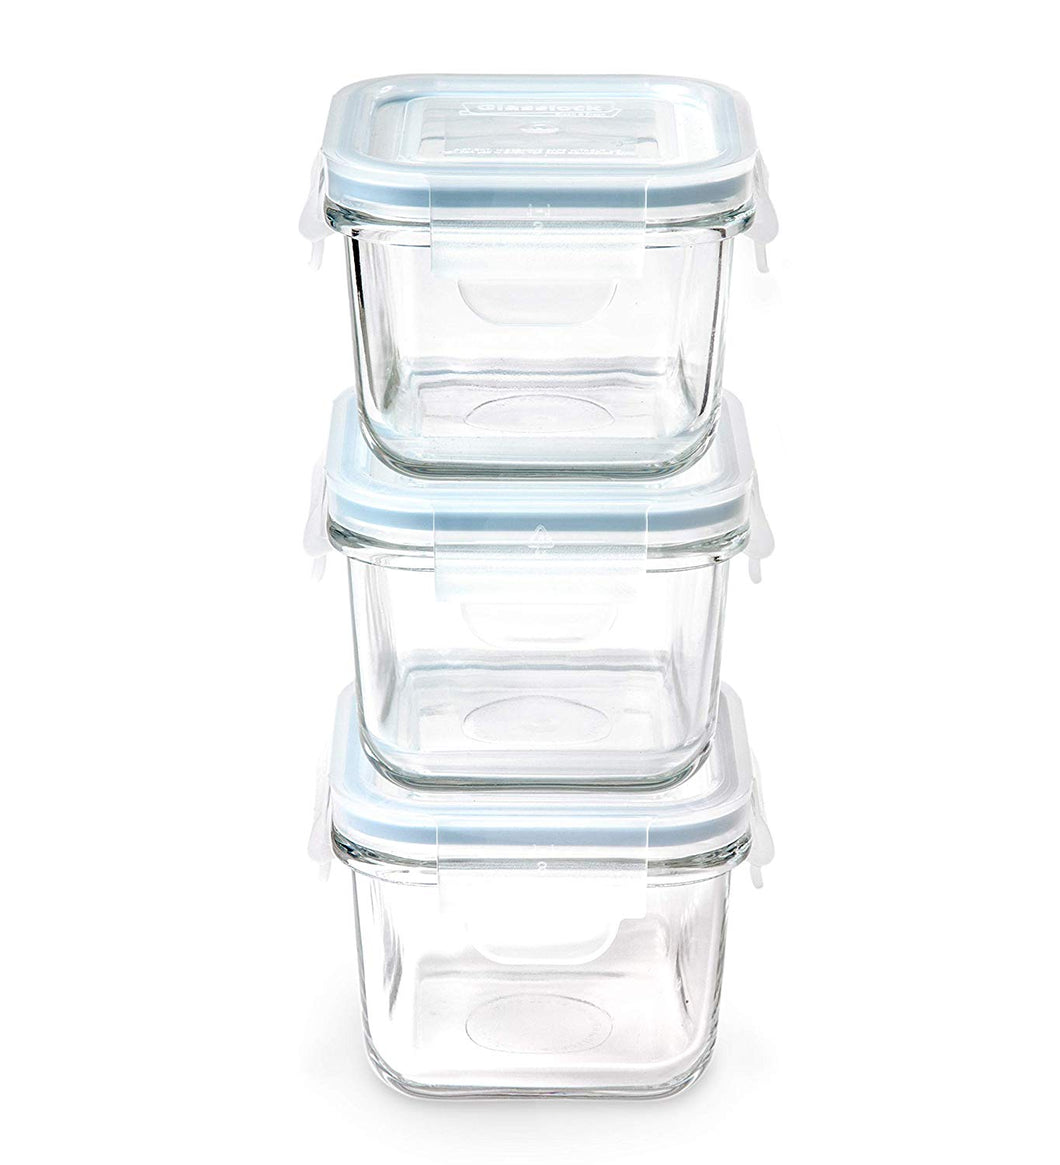 Glasslock Food-Storage Container with Locking Lids Microvave Safe 6pcs Set Square 7oz